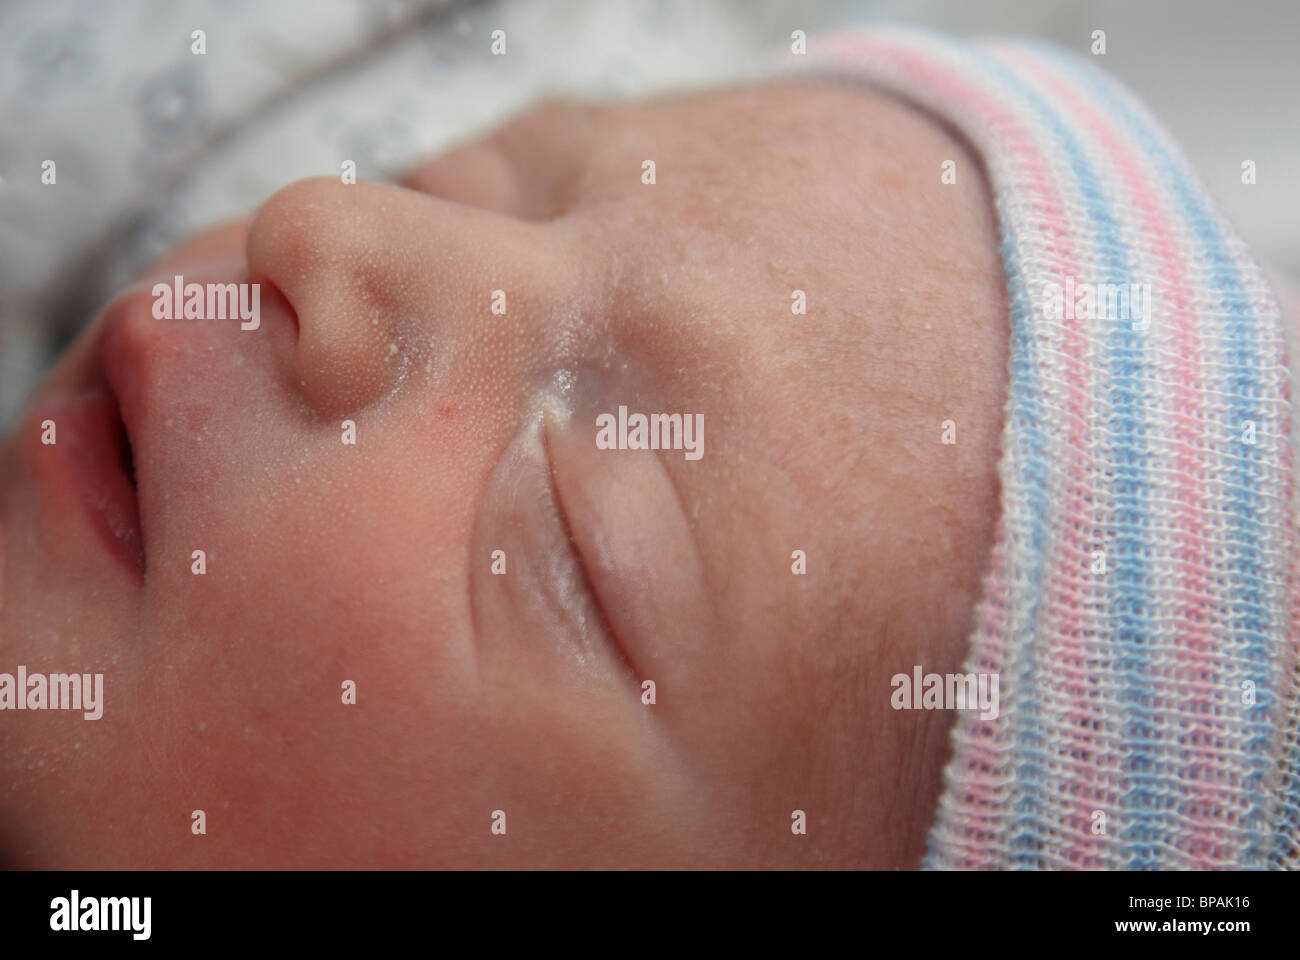 Newborn Baby, only minutes old Stock Photo